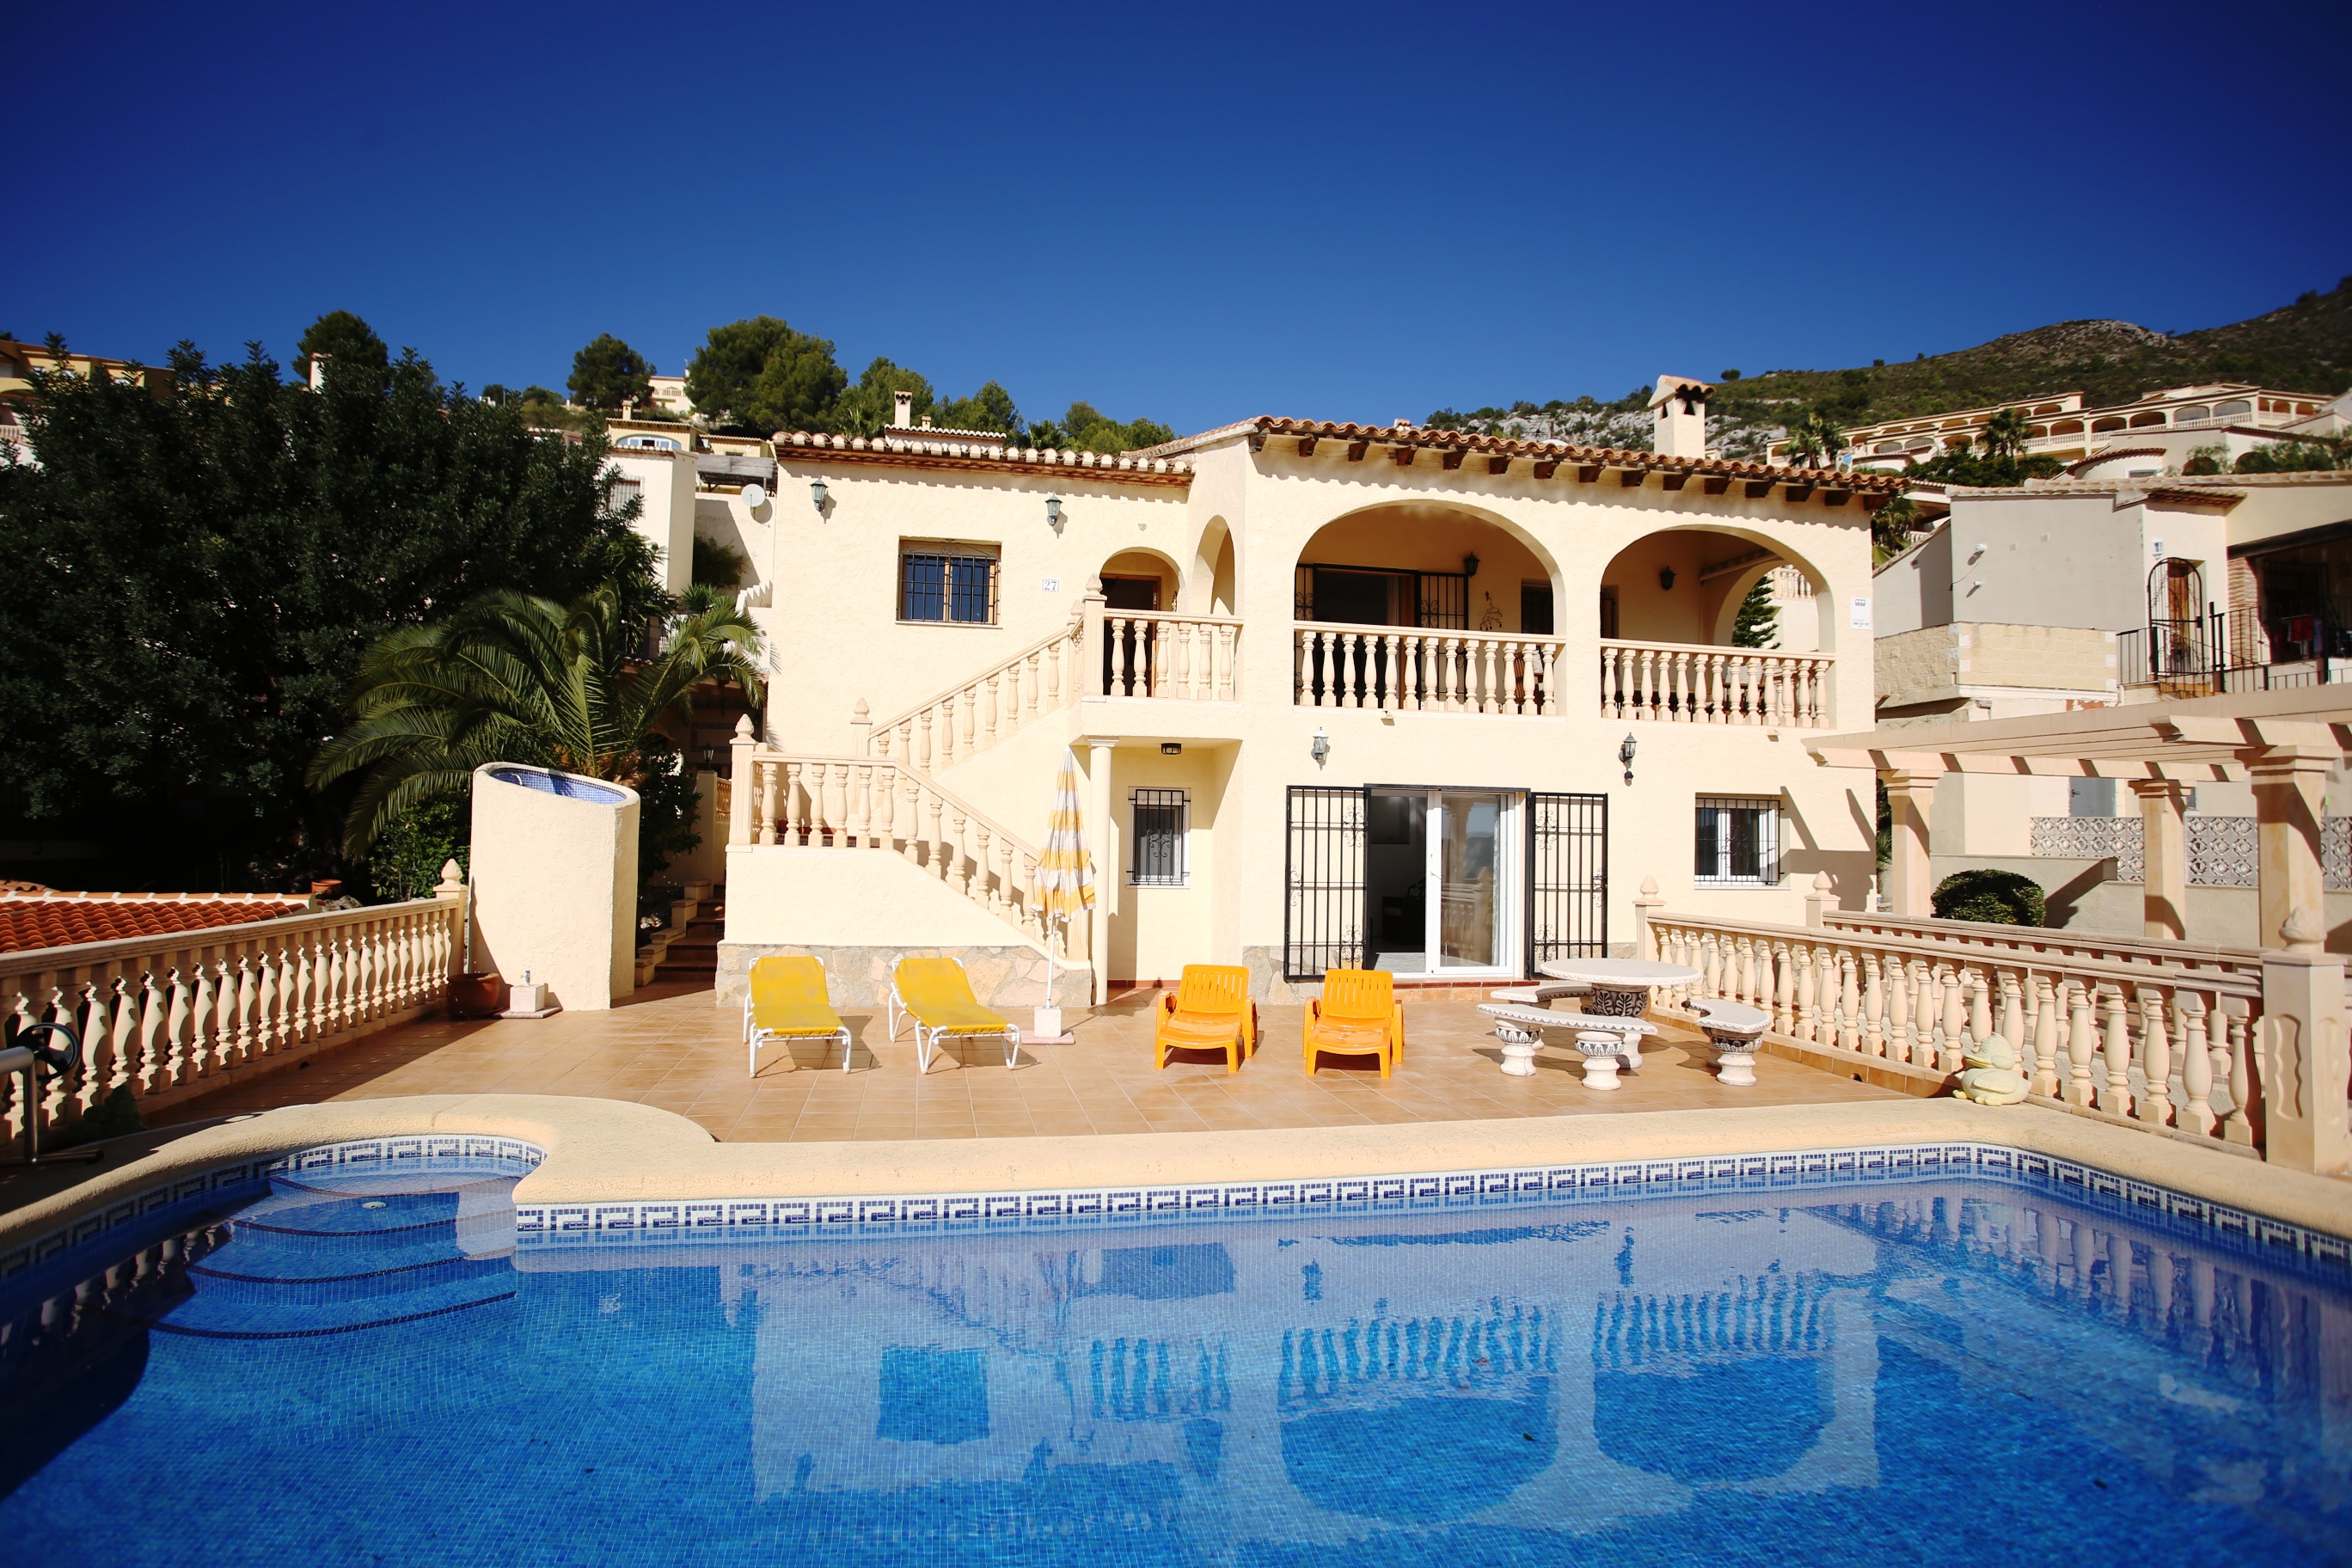 Villa with spectacular valley views in Jalon.